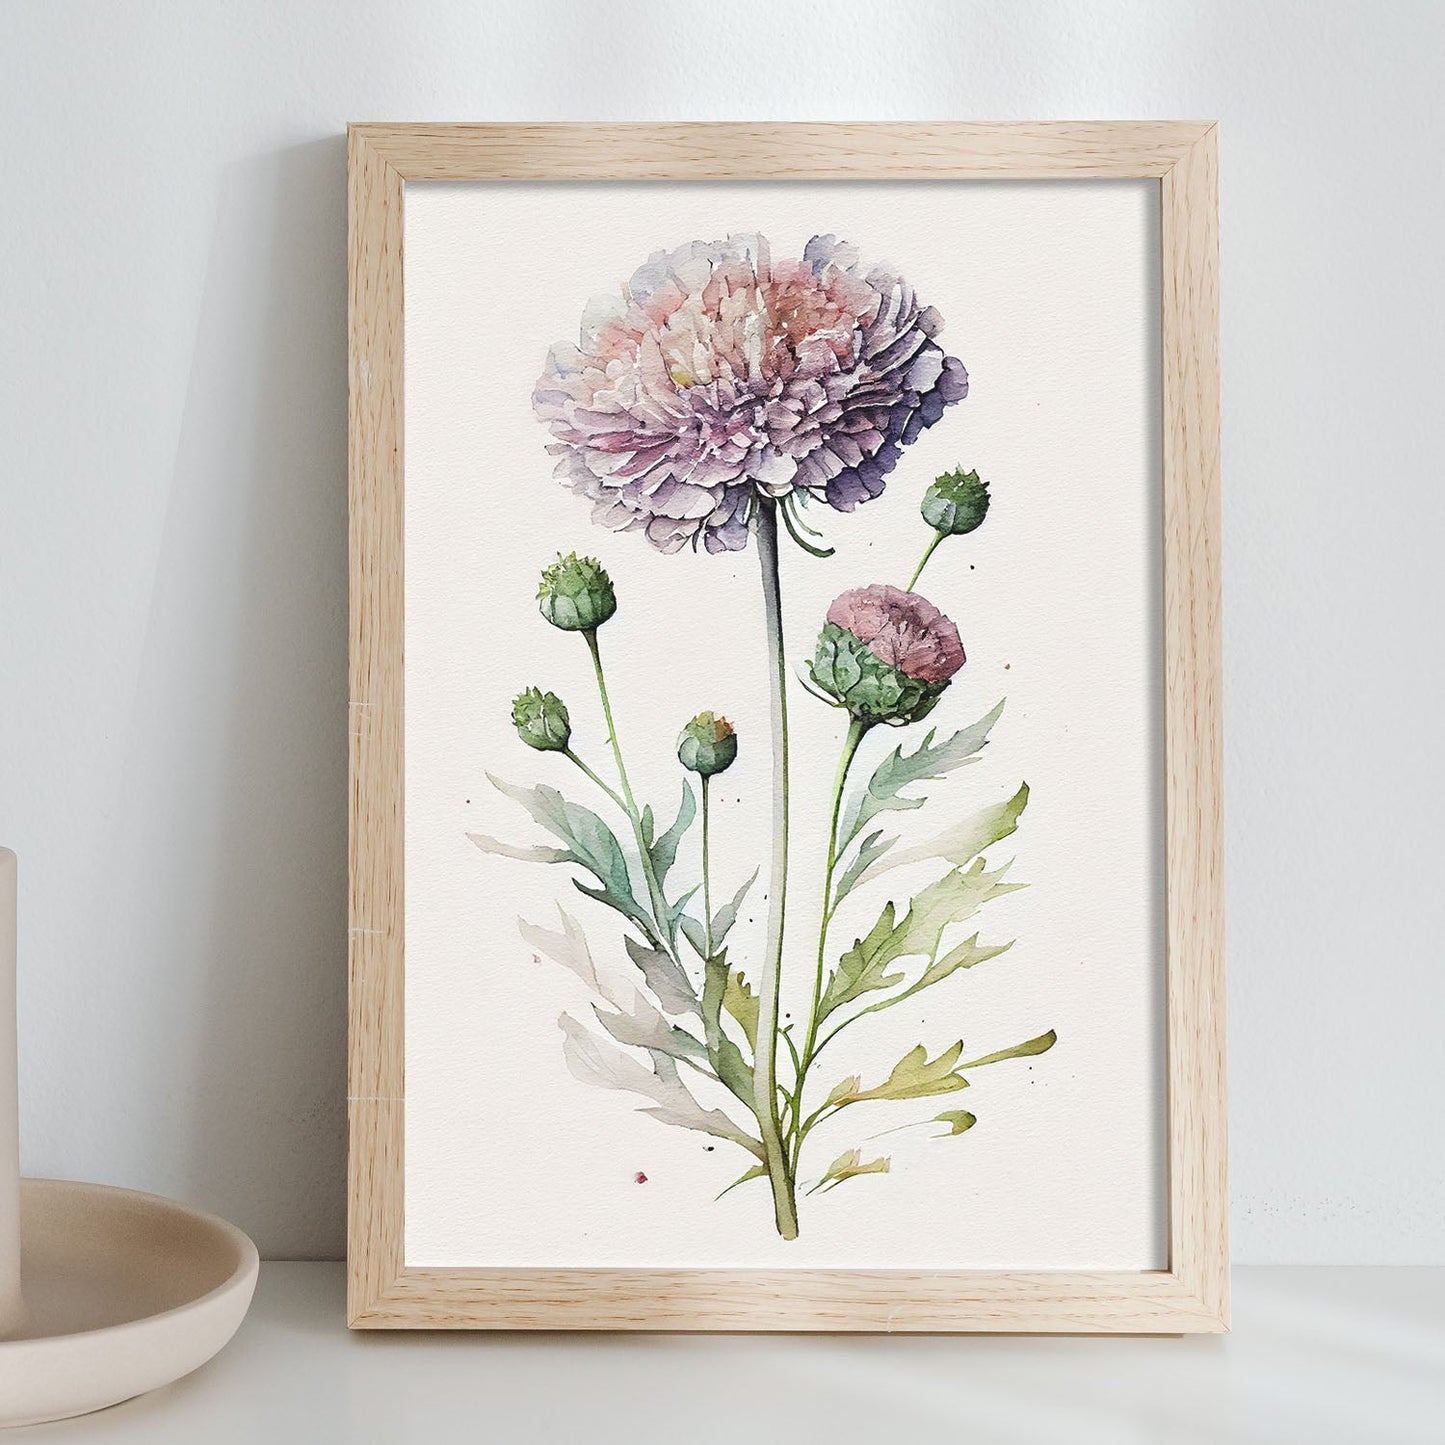 Nacnic watercolor minmal Scabiosa_2. Aesthetic Wall Art Prints for Bedroom or Living Room Design.